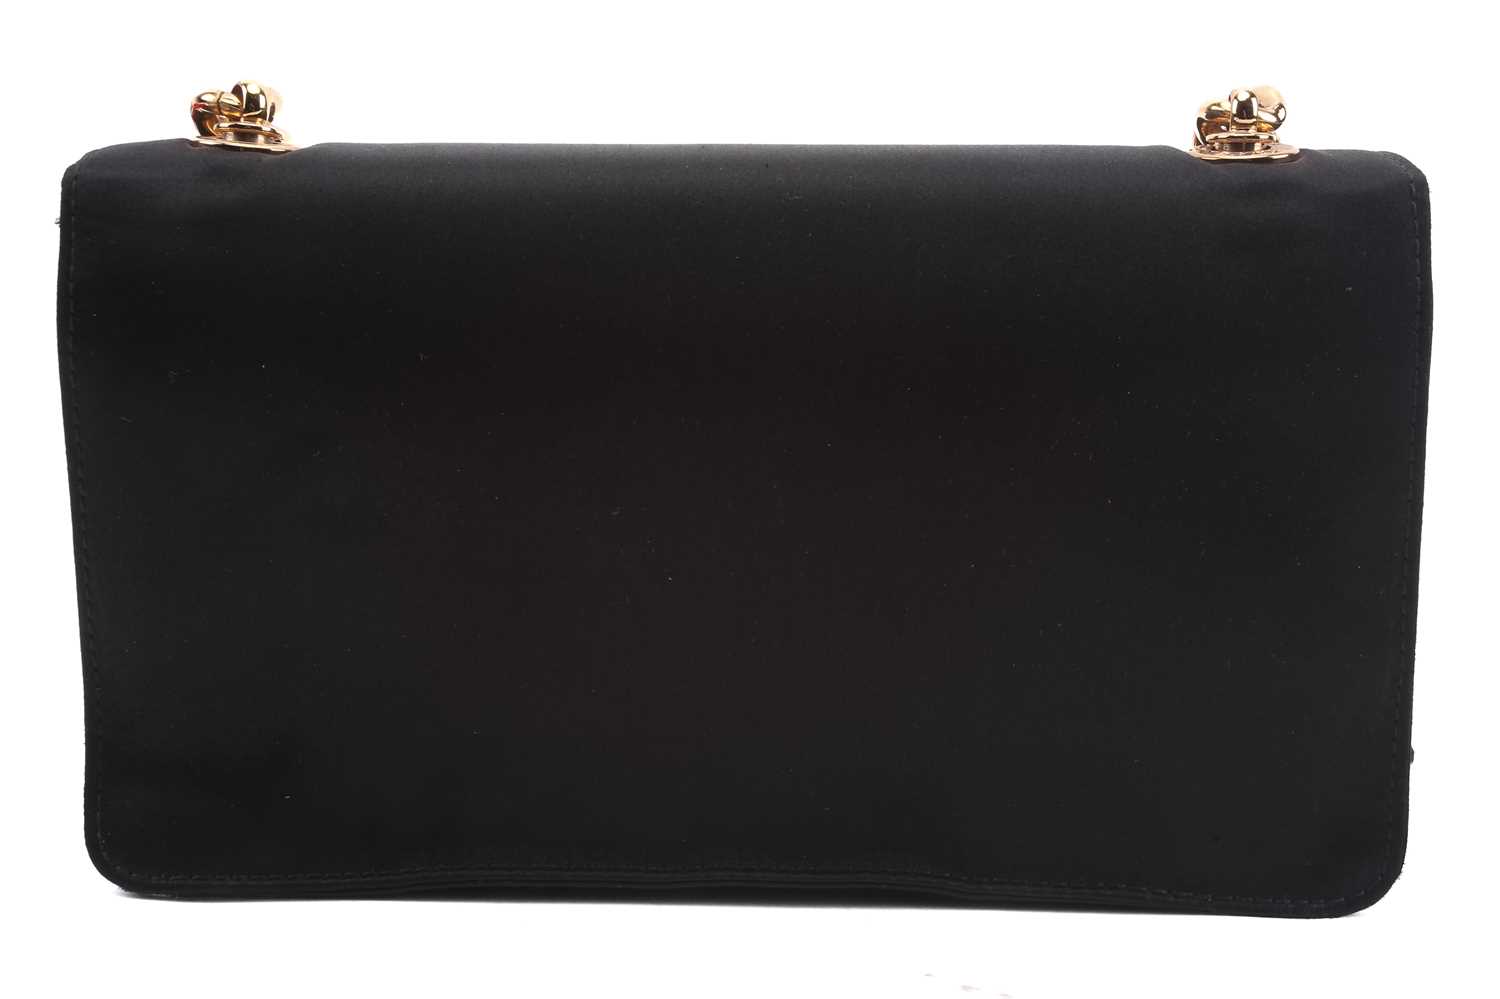 Dolce & Gabbana - 'Miss Belle' shoulder flap bag in black satin, with leather trims and pink satin - Image 5 of 8